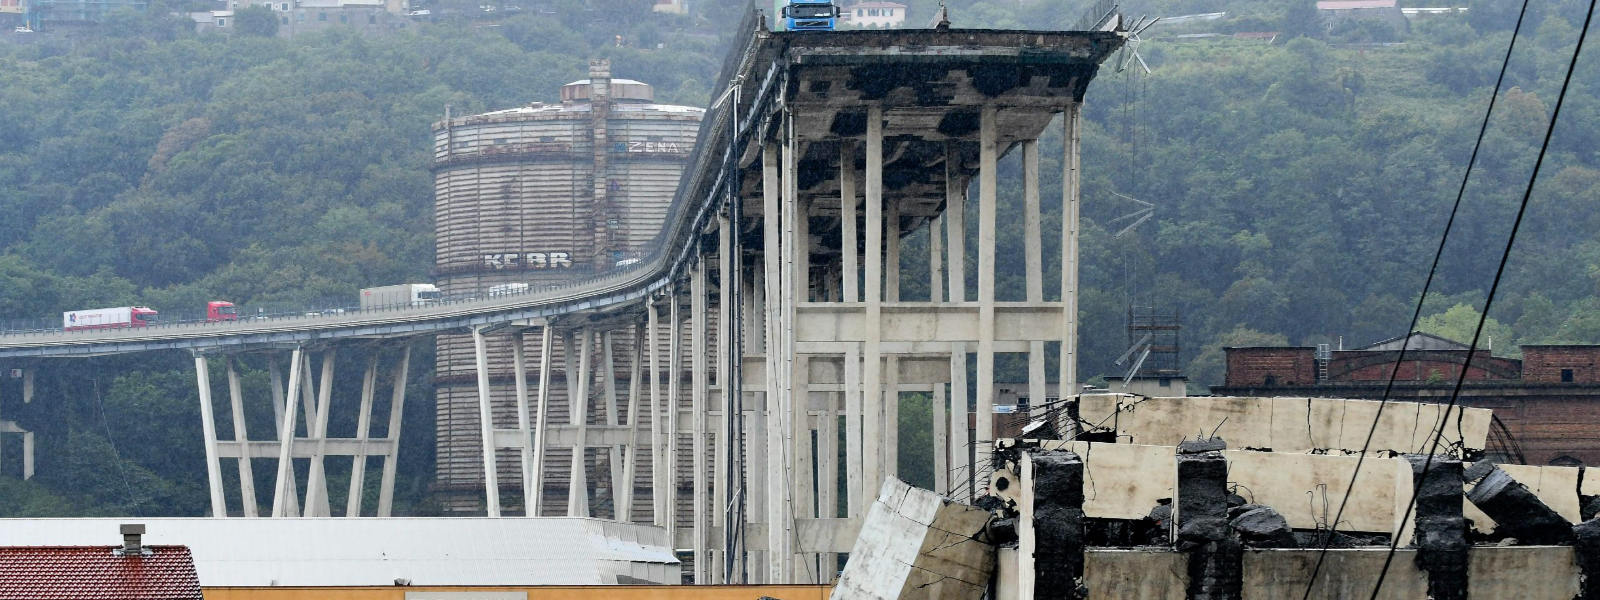 State of emergency after bridge collapse in Genoa